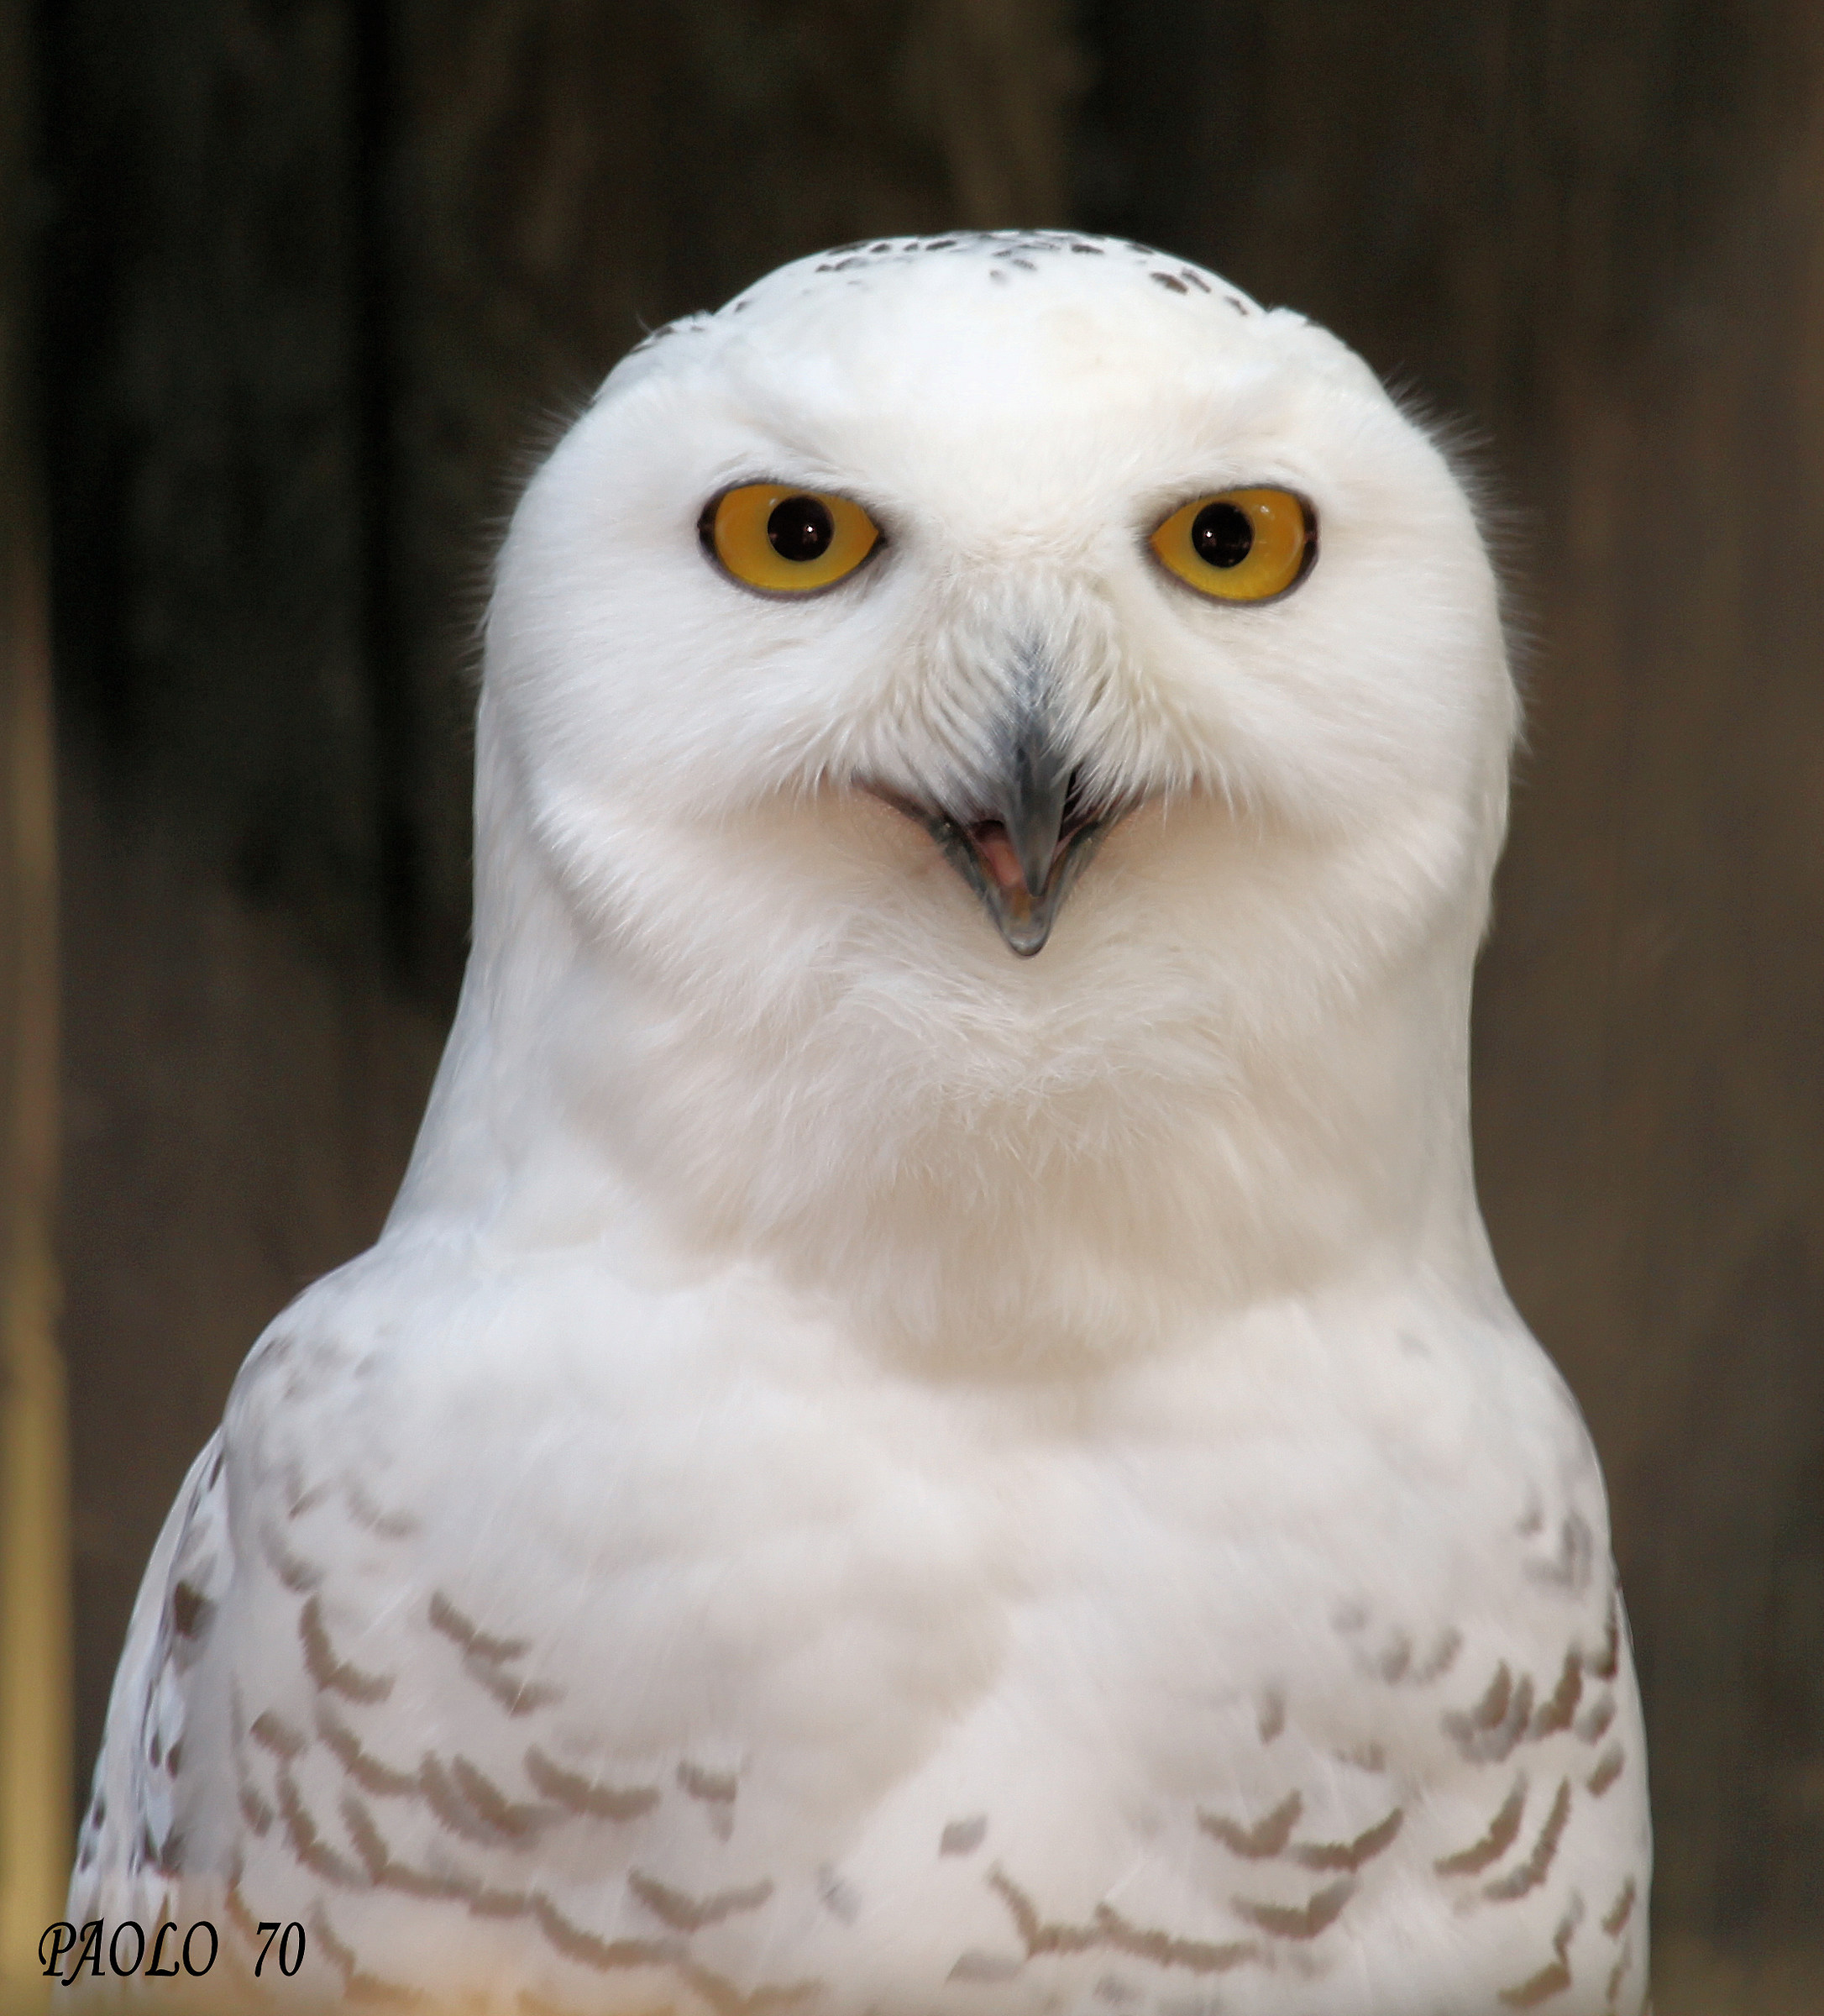 The snow white owl of the fauna park "the corn...